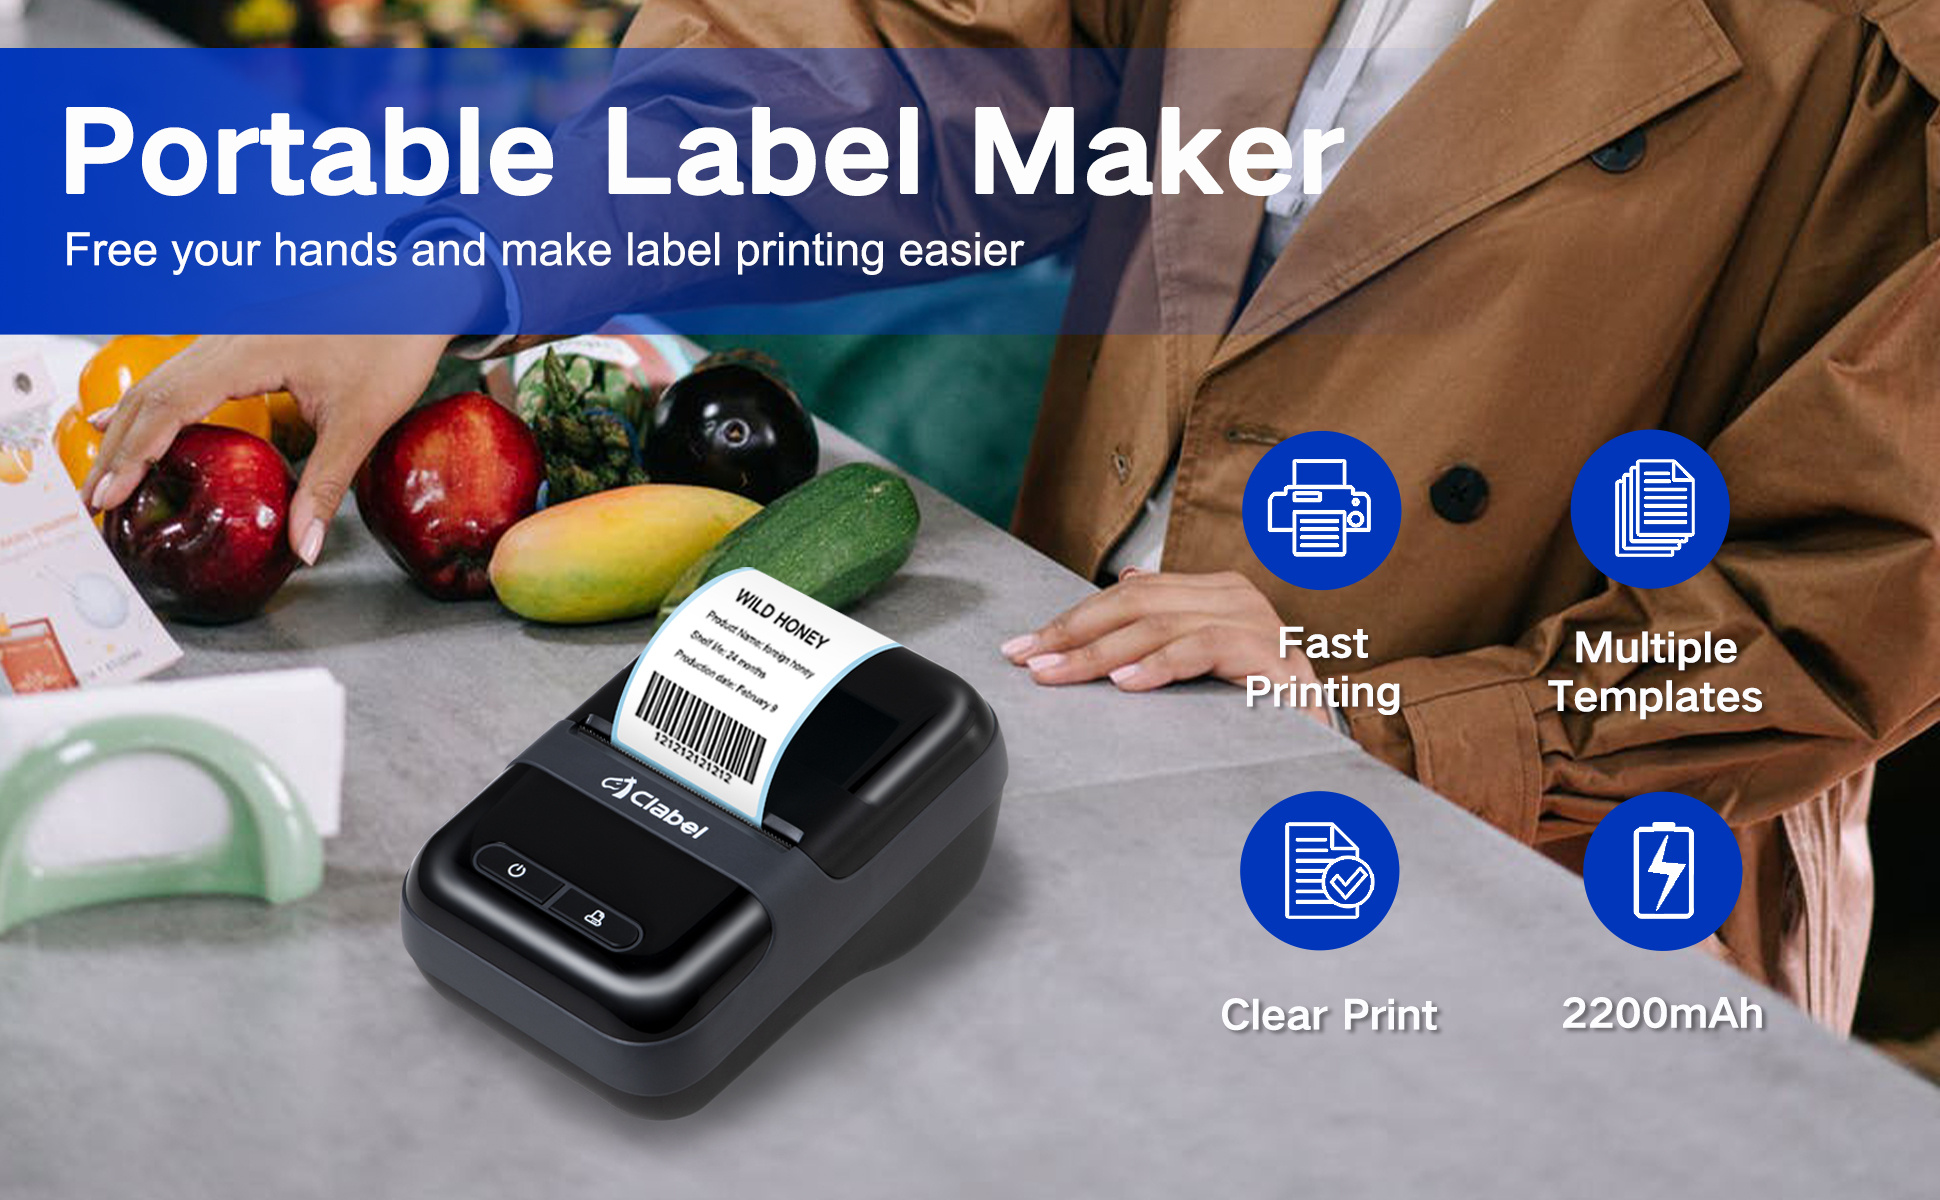 1pc Label Maker CLABEL 220B Portable Barcode Printer Mini Wireless Thermal Label Maker Printer For Jewelry Clothing Barcode Compatible With Android IOS System For Retail QR Code